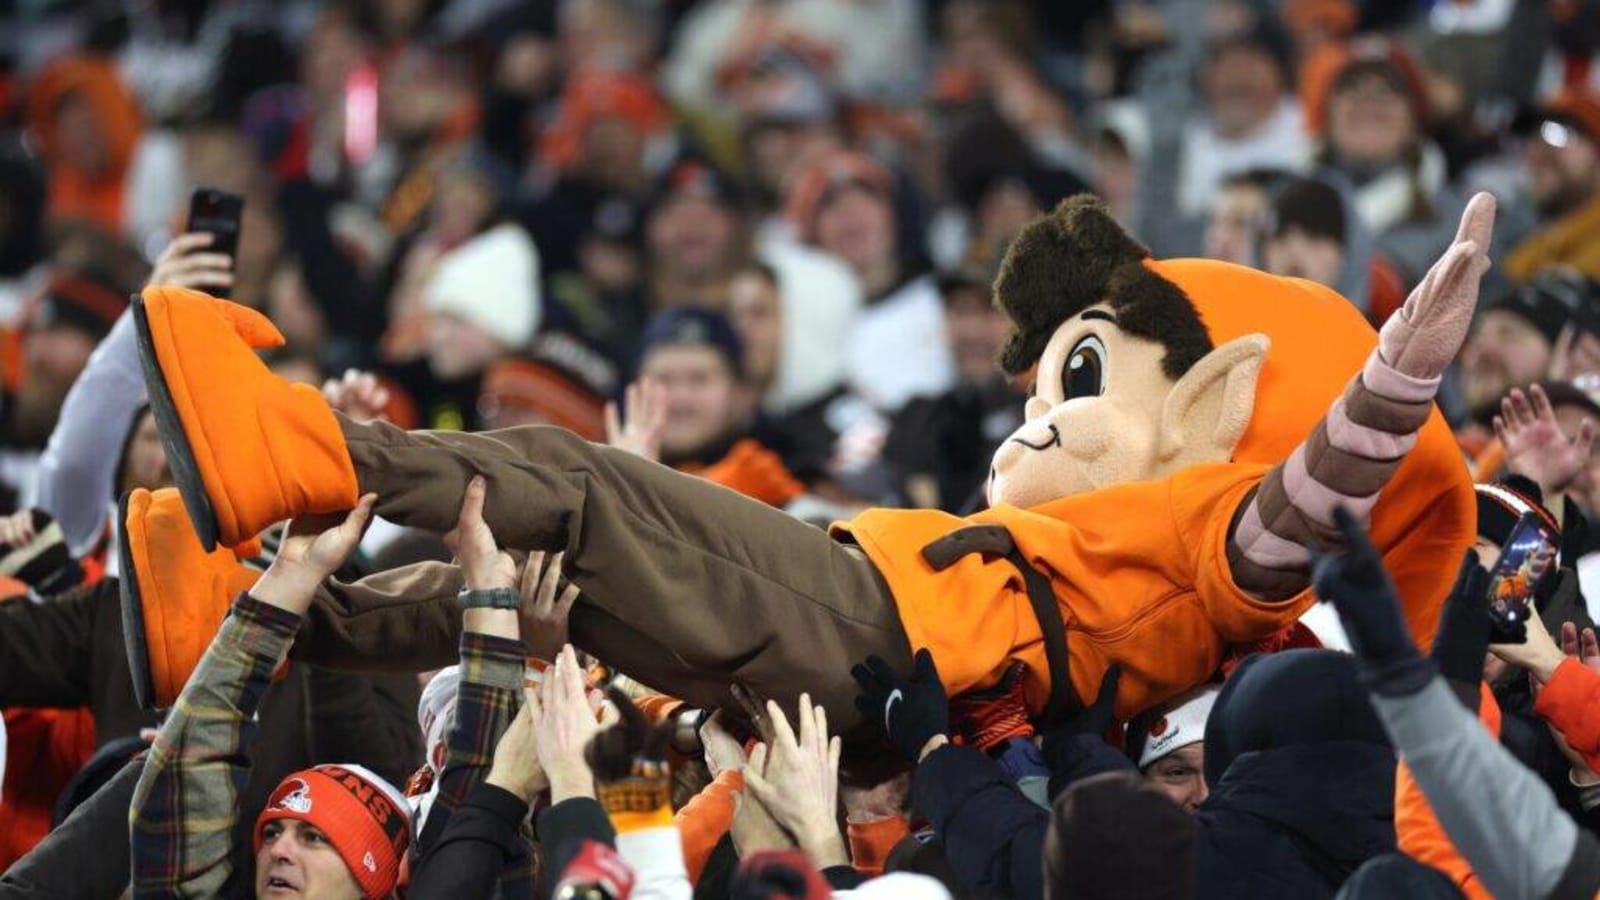 The Newest Addition to a Carousel Situation on the Browns